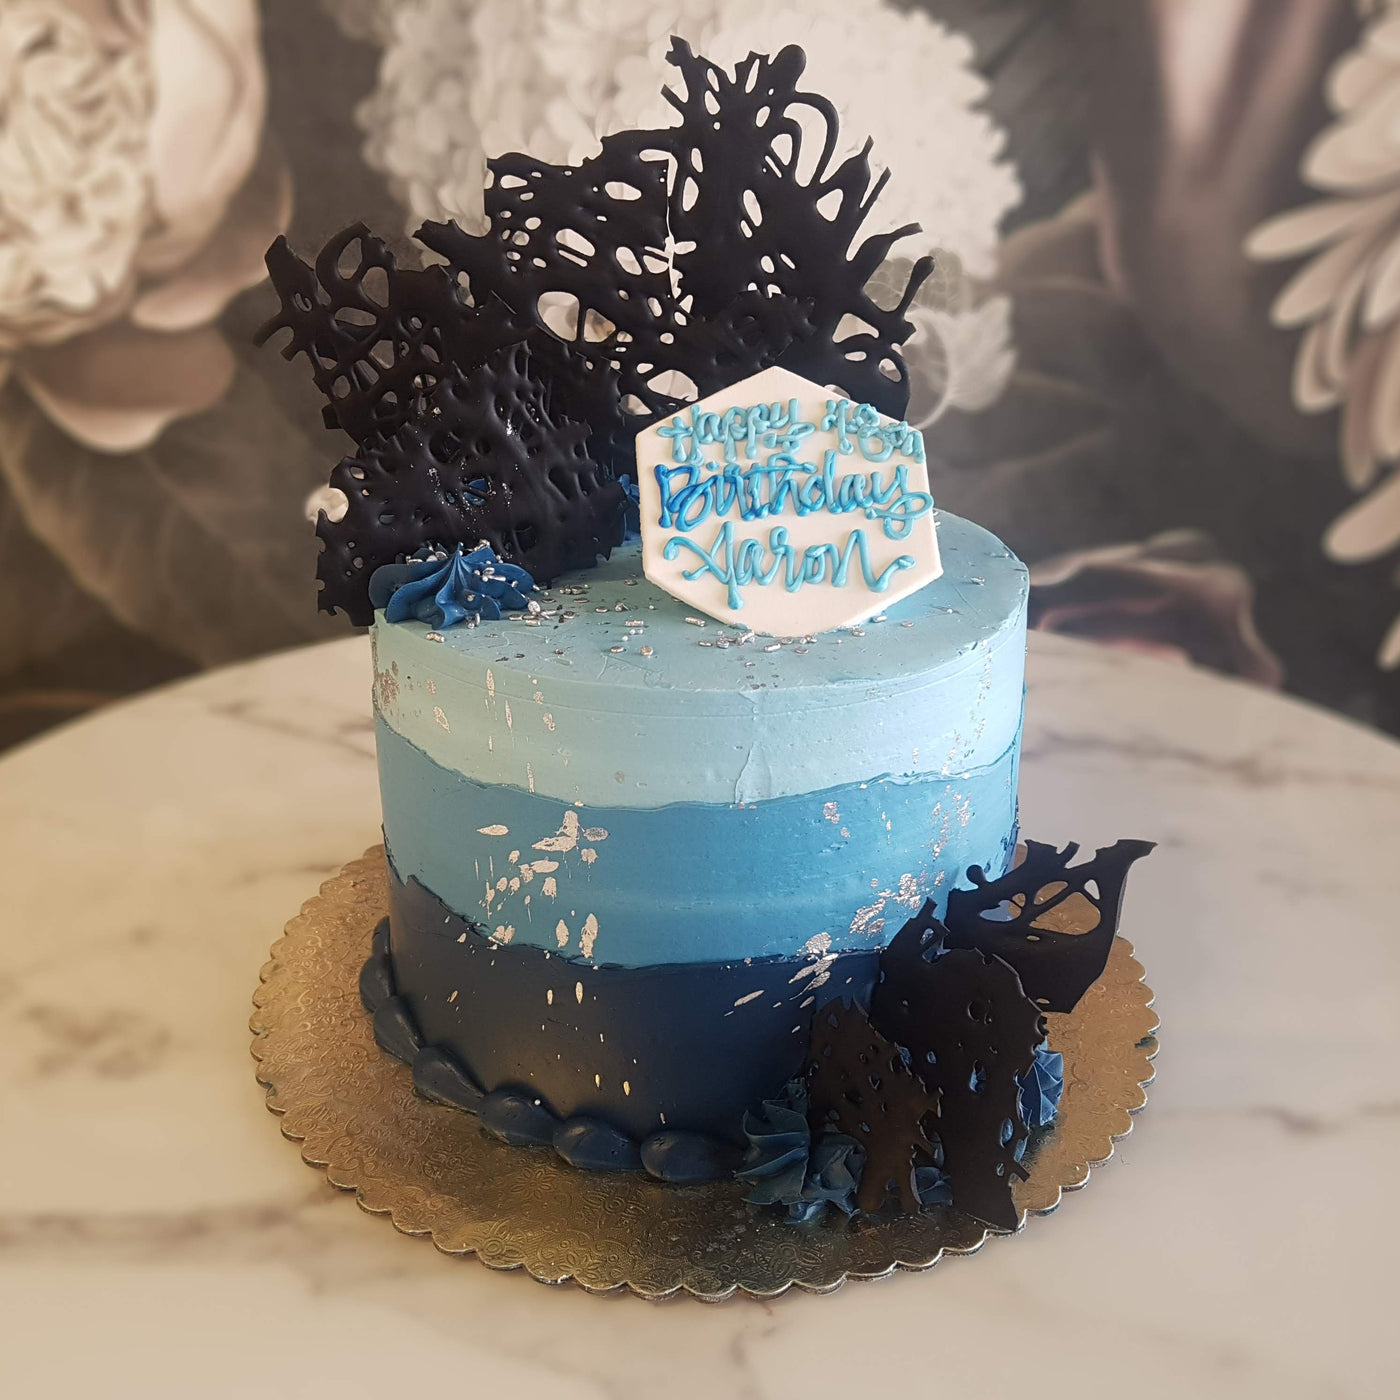 Ombre cakes are here to stay, throw in a couple of silver spatter, sprinkles an chocolate shards and we have ourselves a great men's birthday cake!